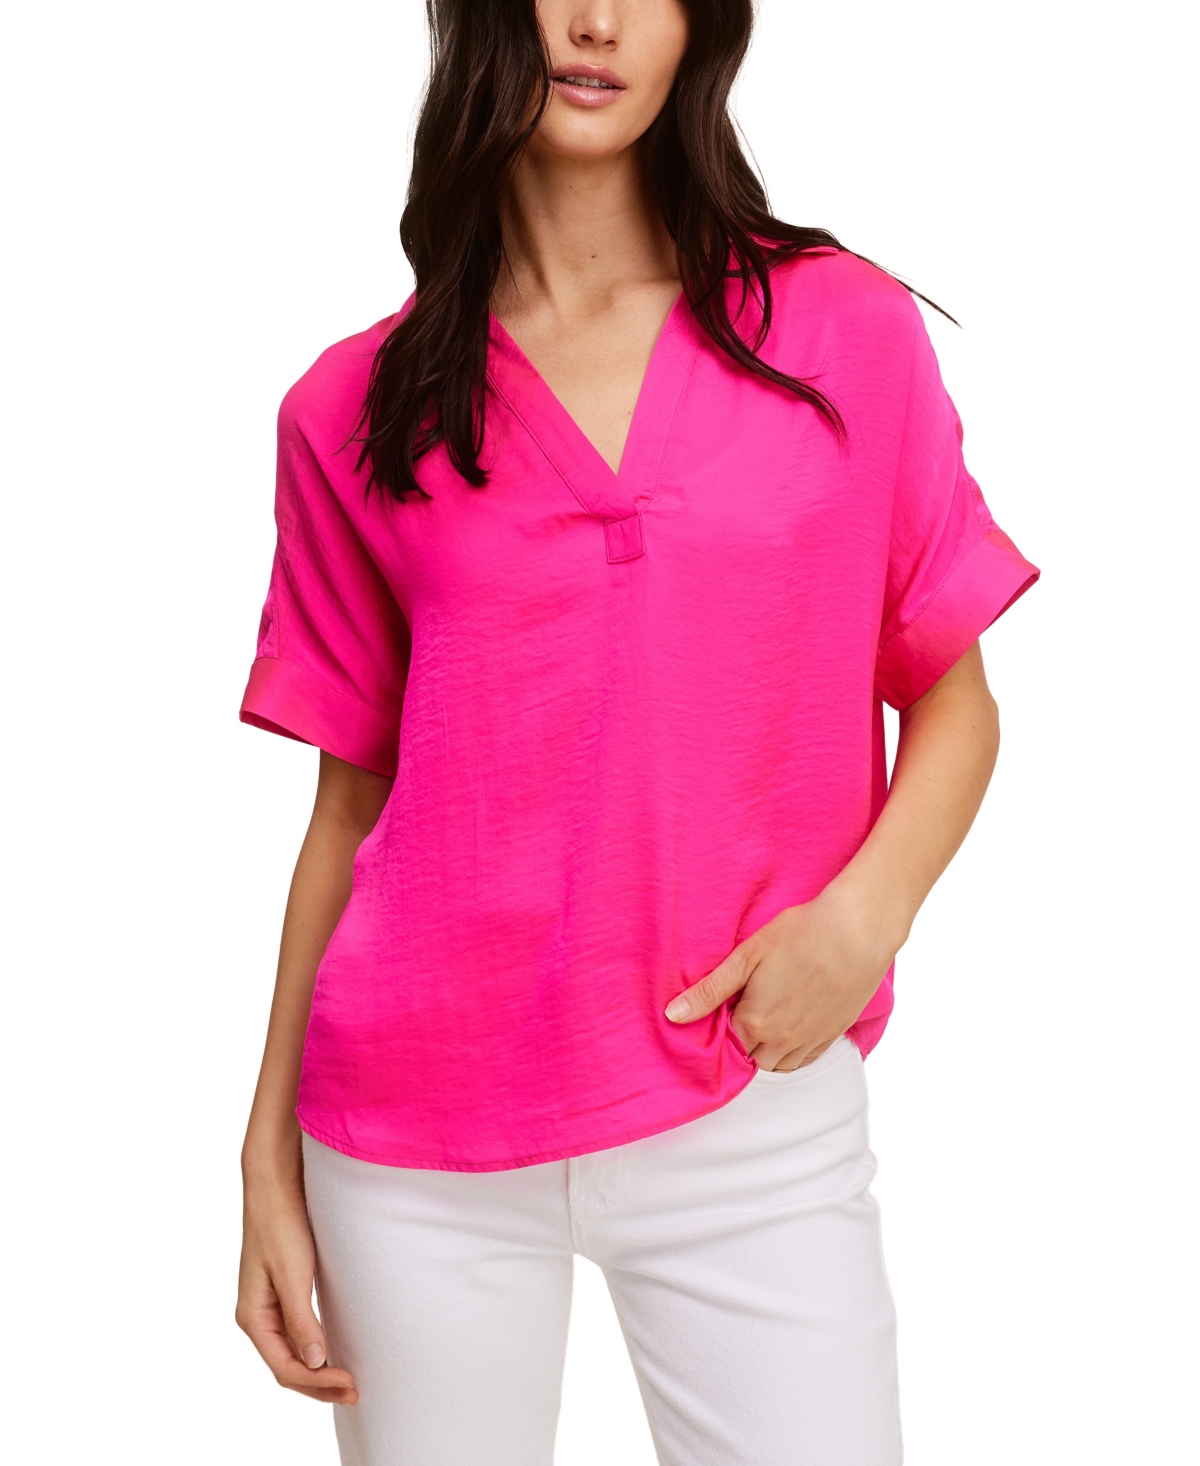 Solid Washer Woven Split Neck Top - Vibrant Pink